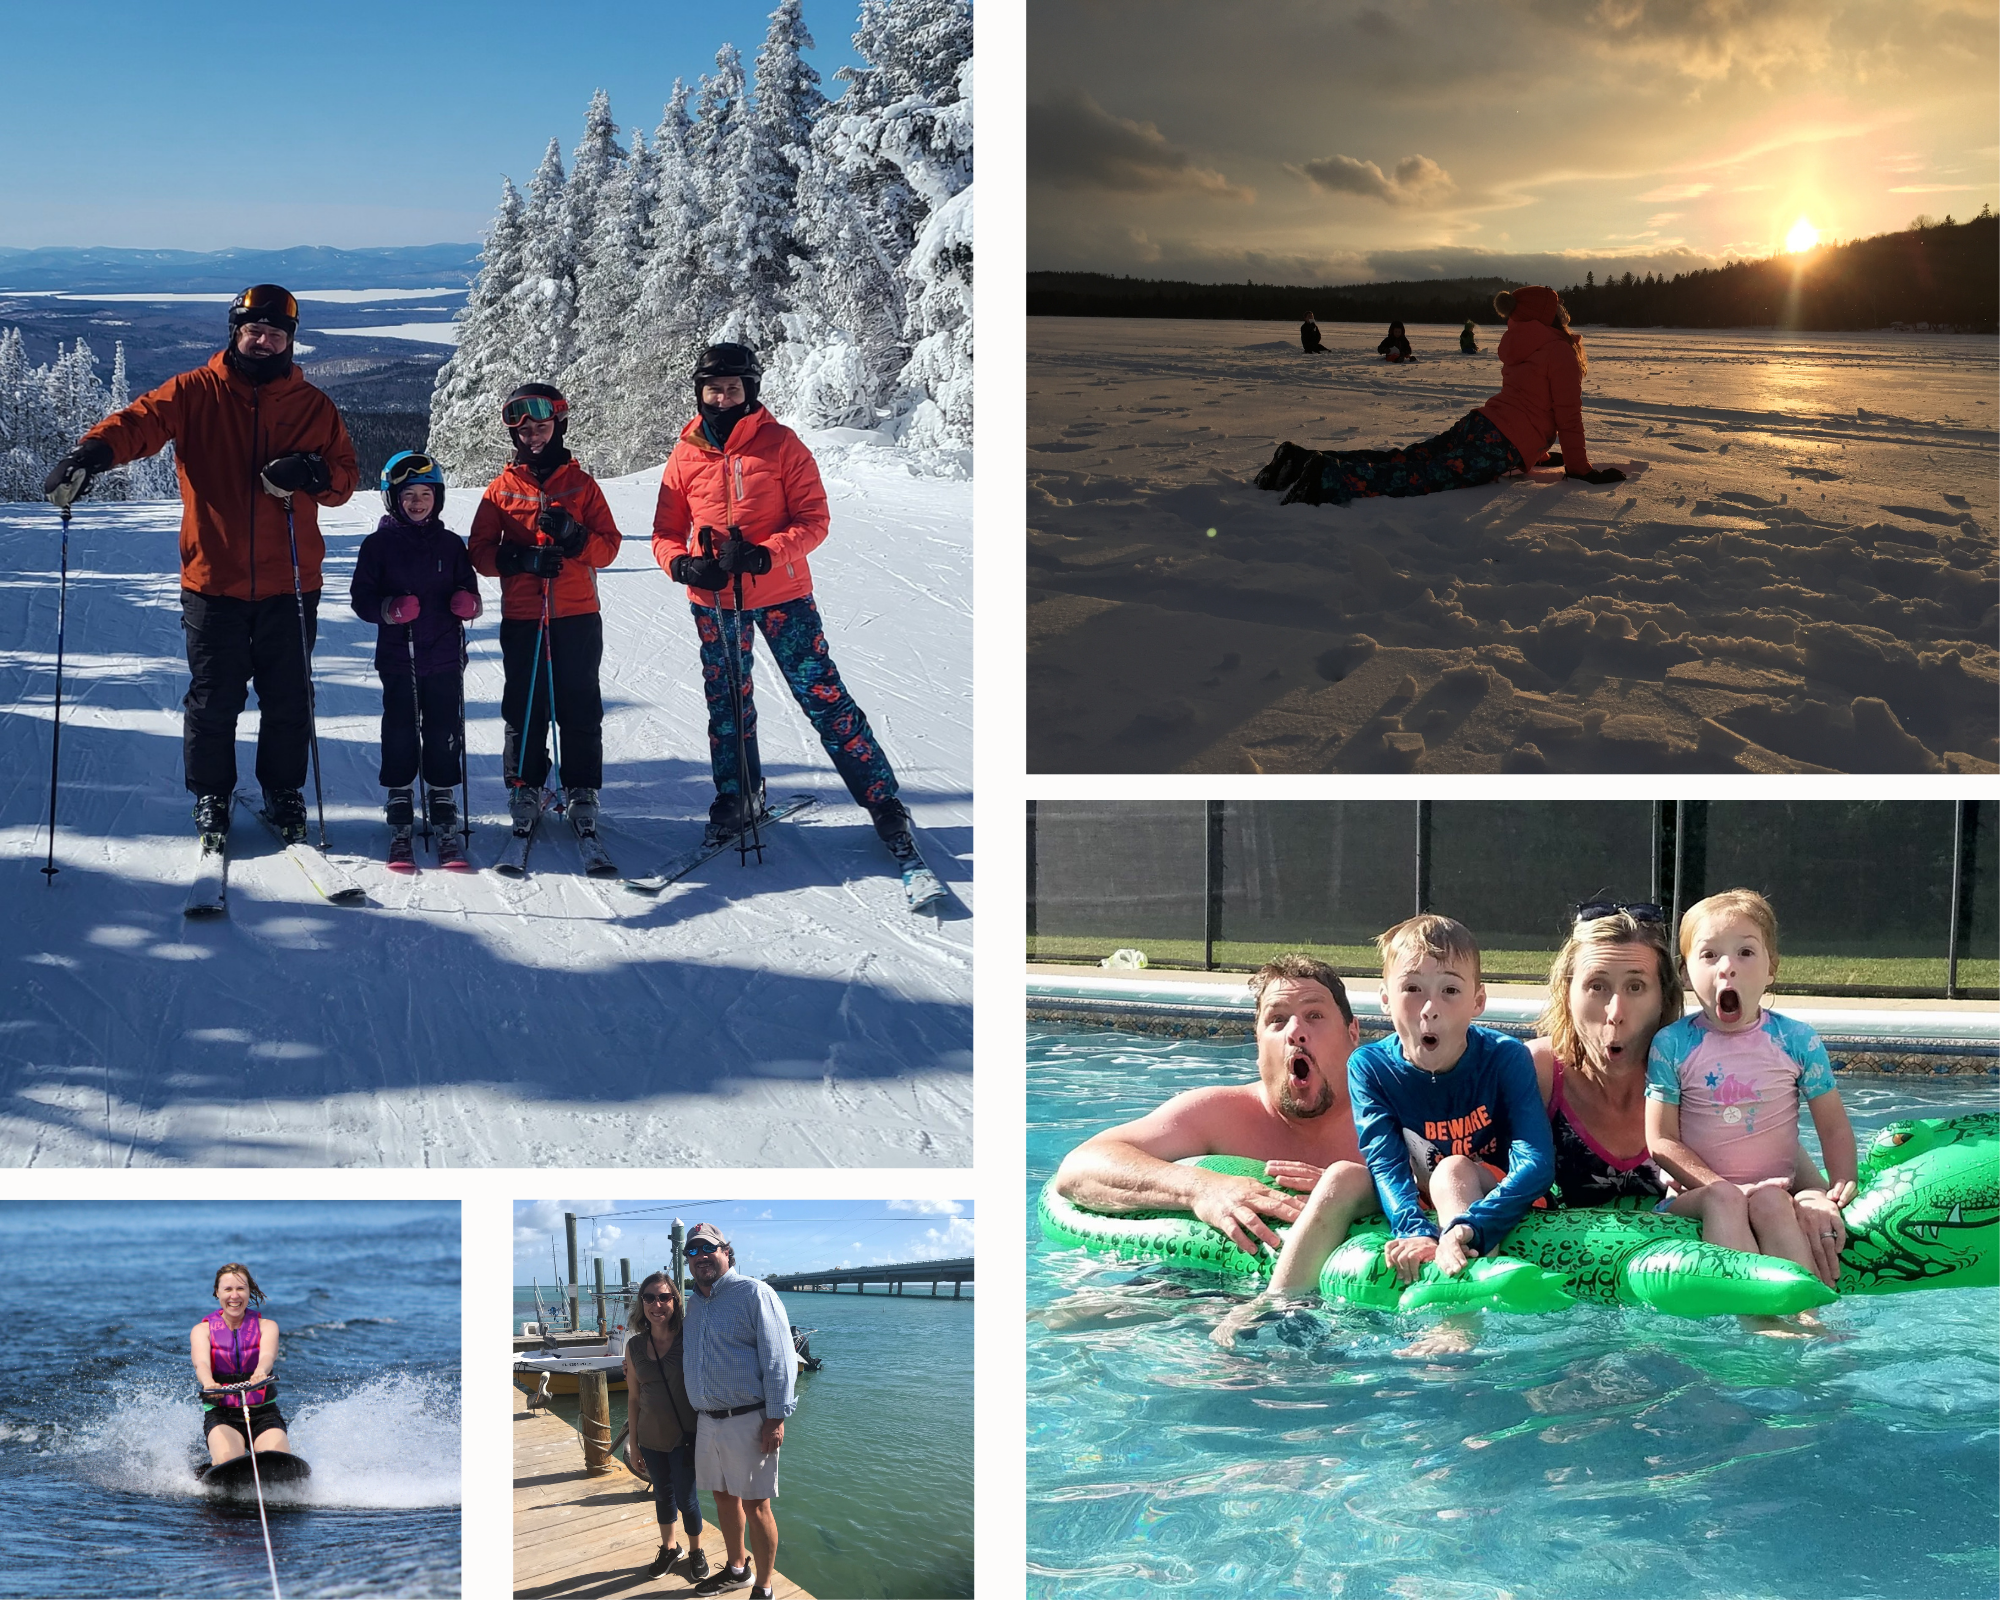 photo collage, clockwise from top right, woman in snow gear updog pose in front of a sunset, white family in a pool smiling at the camera, white couple stand on a dock in front of a bridge, smiling white woman on kneeboard gripping tow line, white family poses while skiing